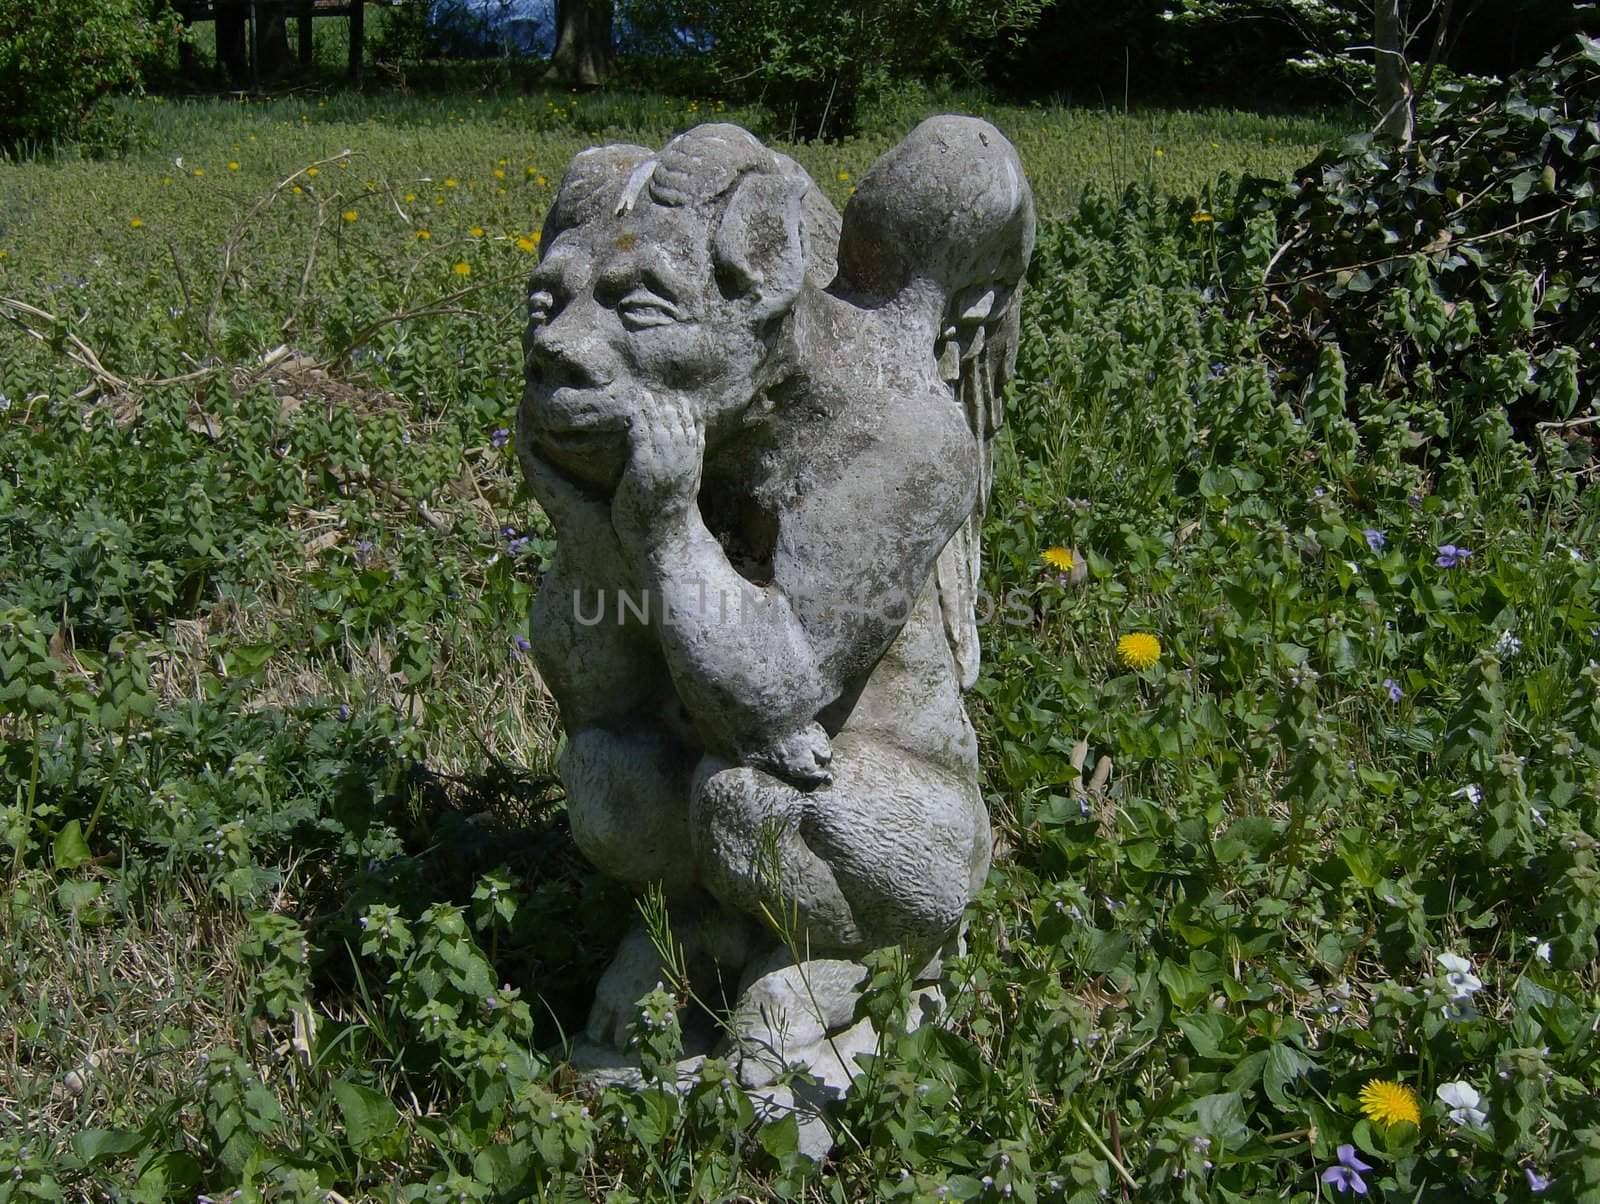 A gargoyle patiently waiting for his garden to guard